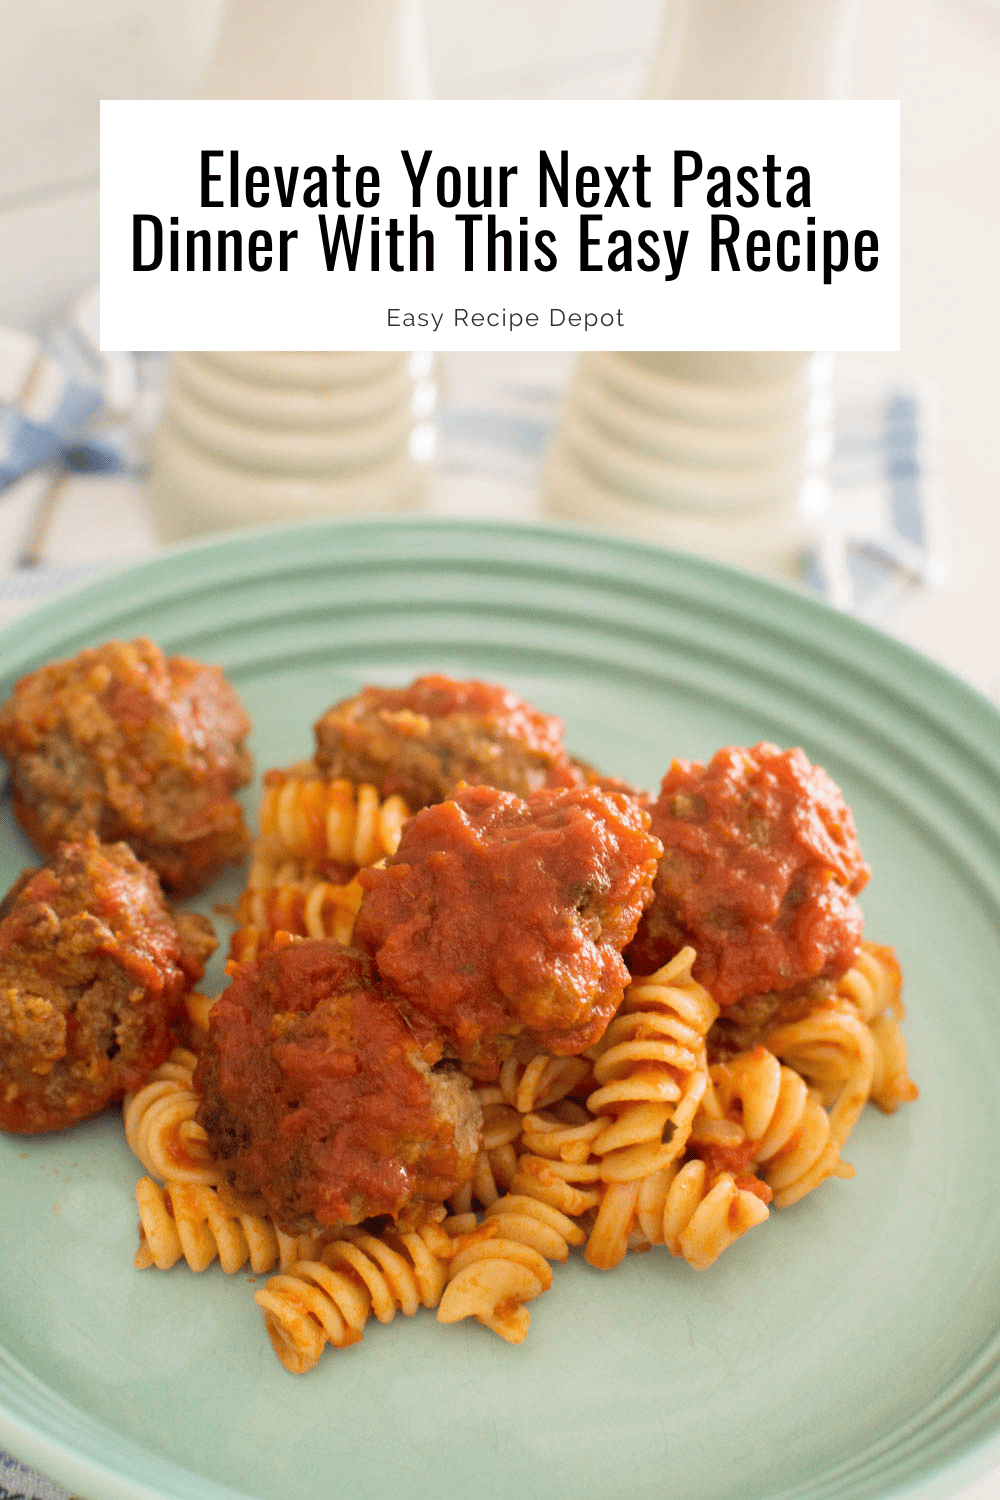 Basic homemade meatballs sitting on a bed of pasta in a turquoise pasta bowl